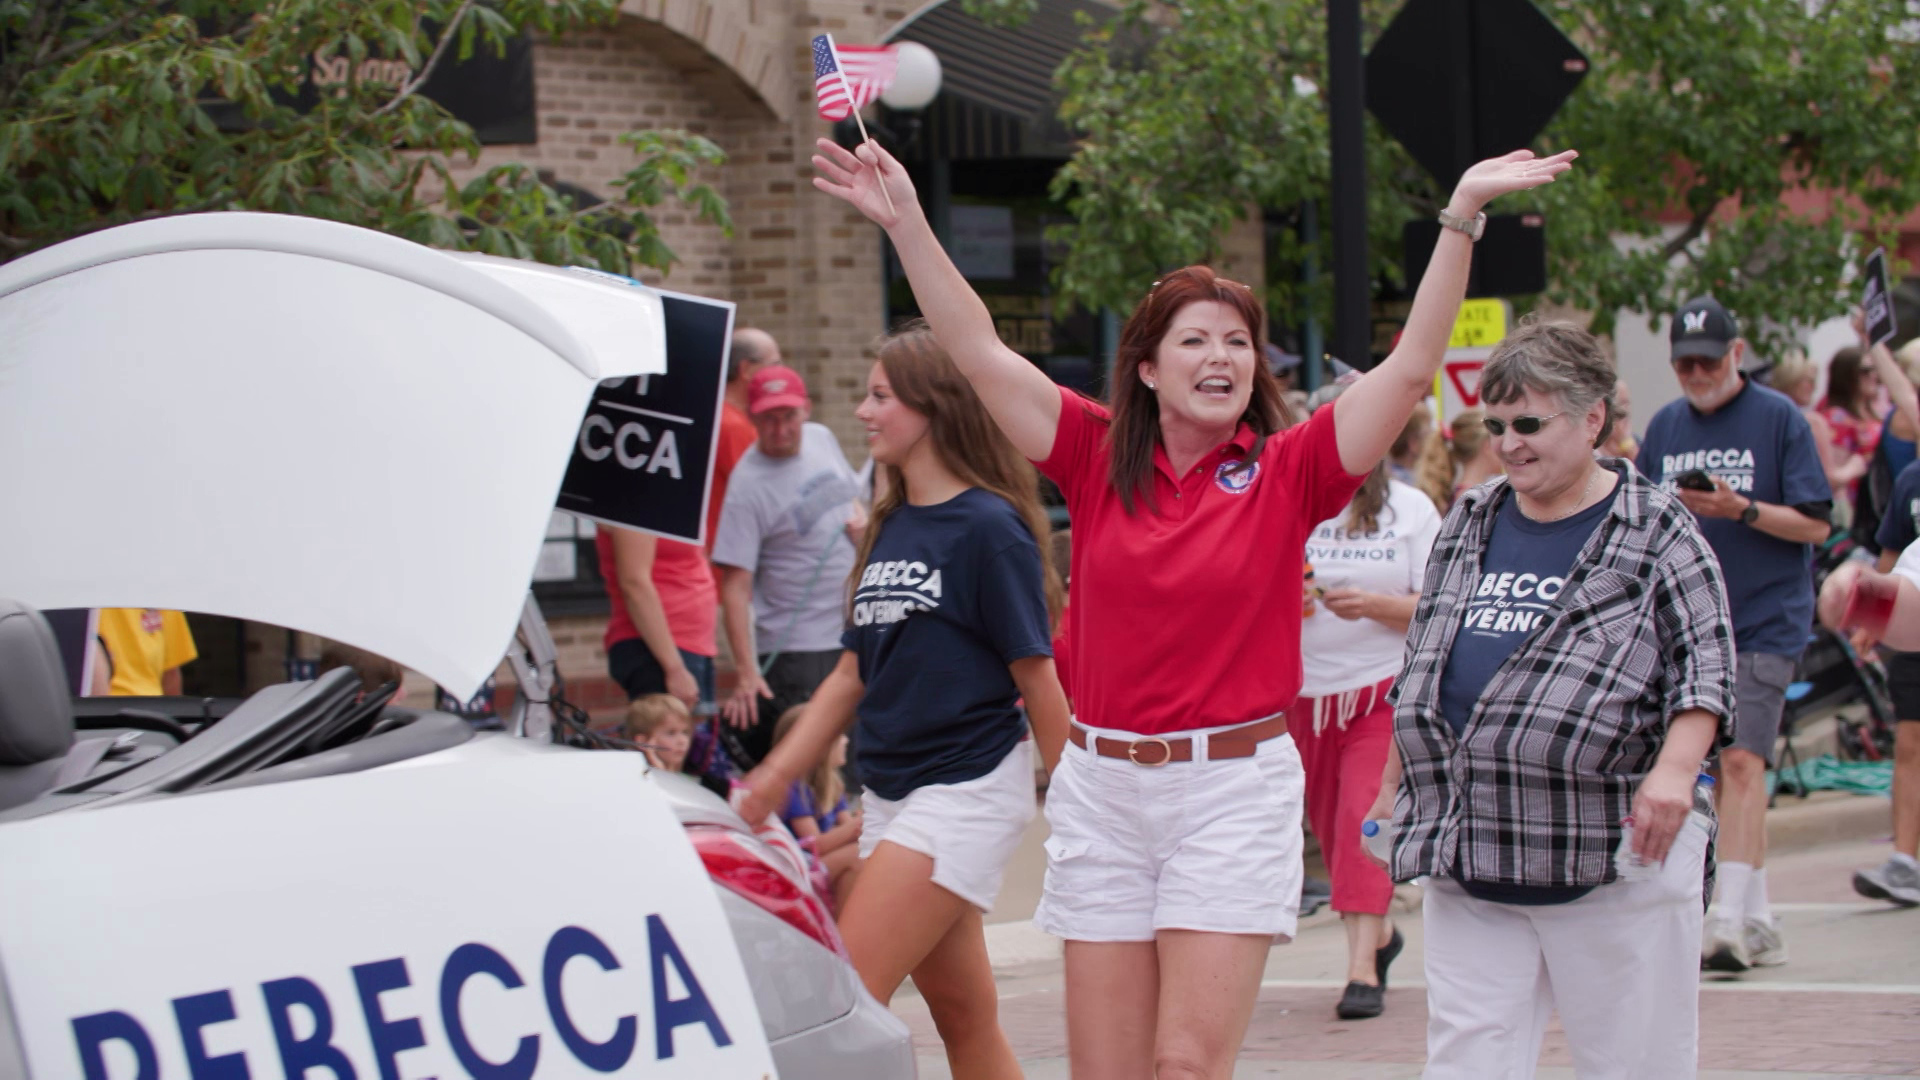 Rebecca Kleefisch holds her arms up in the air while holding a small U.S. flag in her right hand while walking down the street as part of a parade, surrounded by other people wearing t-shirts reading "Rebecca for Governor."